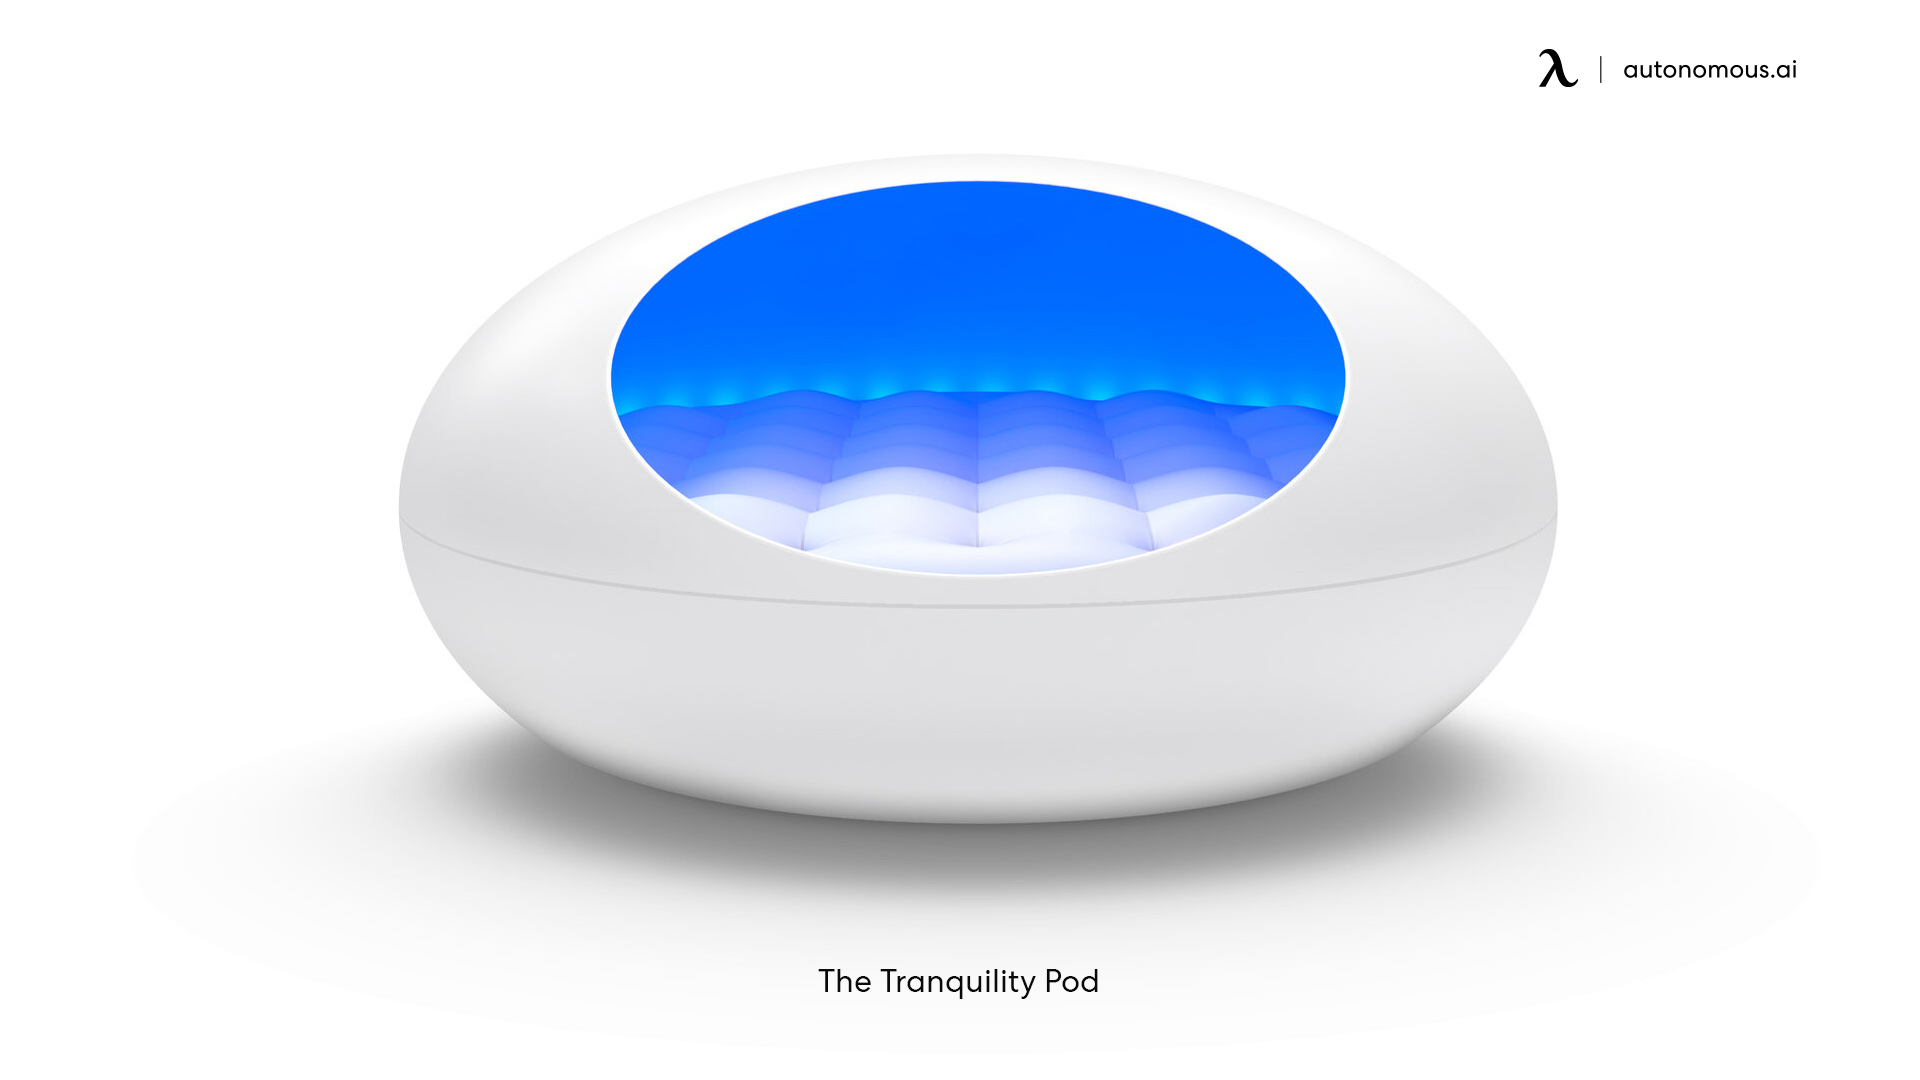 Tranquility soundproof sleeping pod